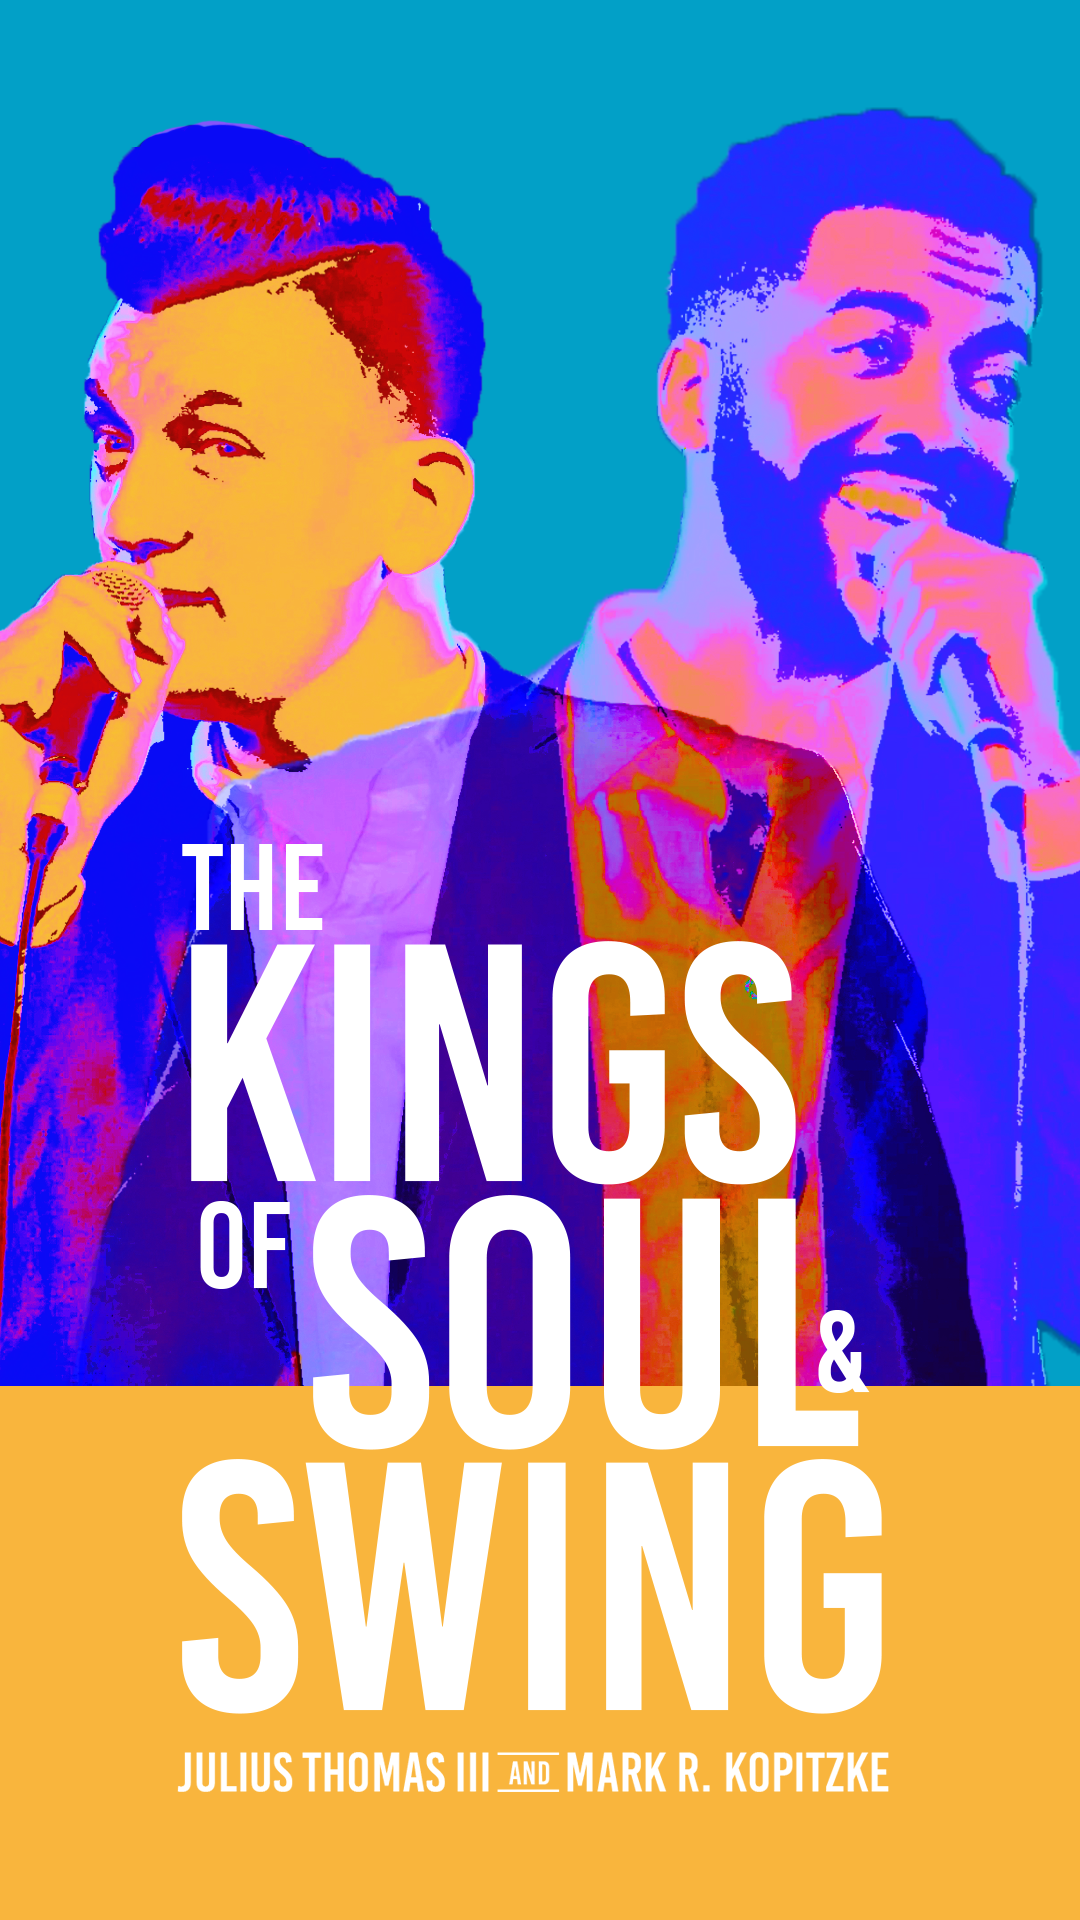 Image of the Kings of Soul and Swing